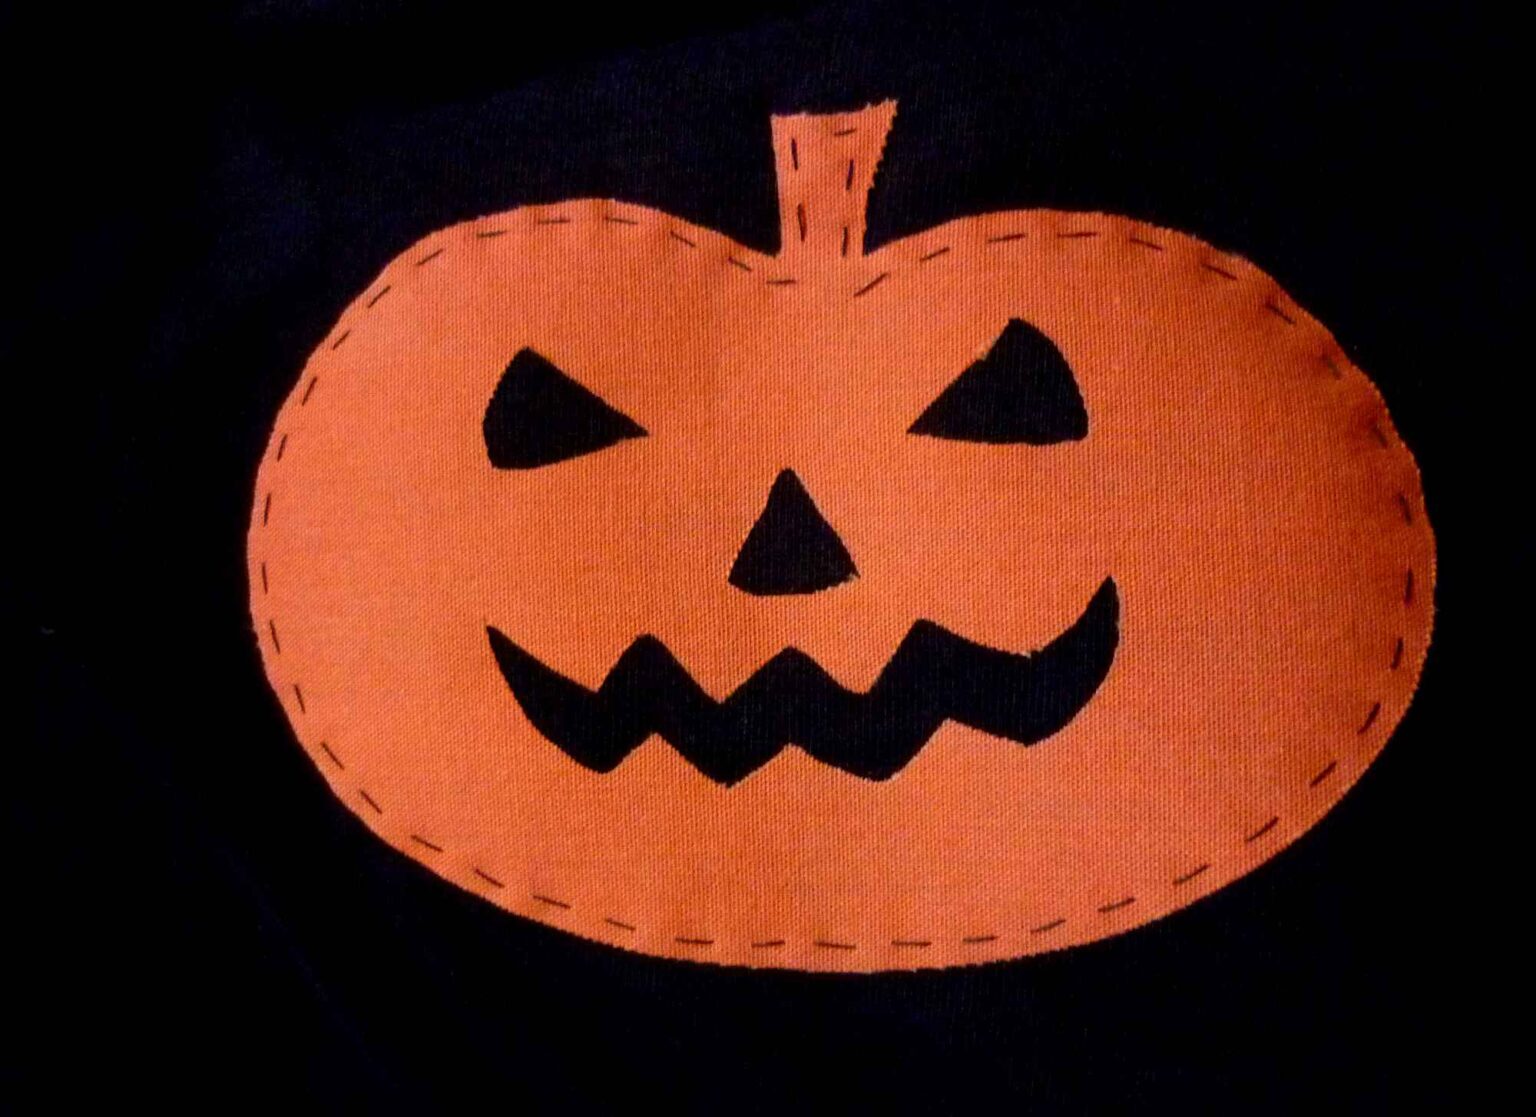 orange iron on pumpkin face motif applied to black top with running stitch decoration